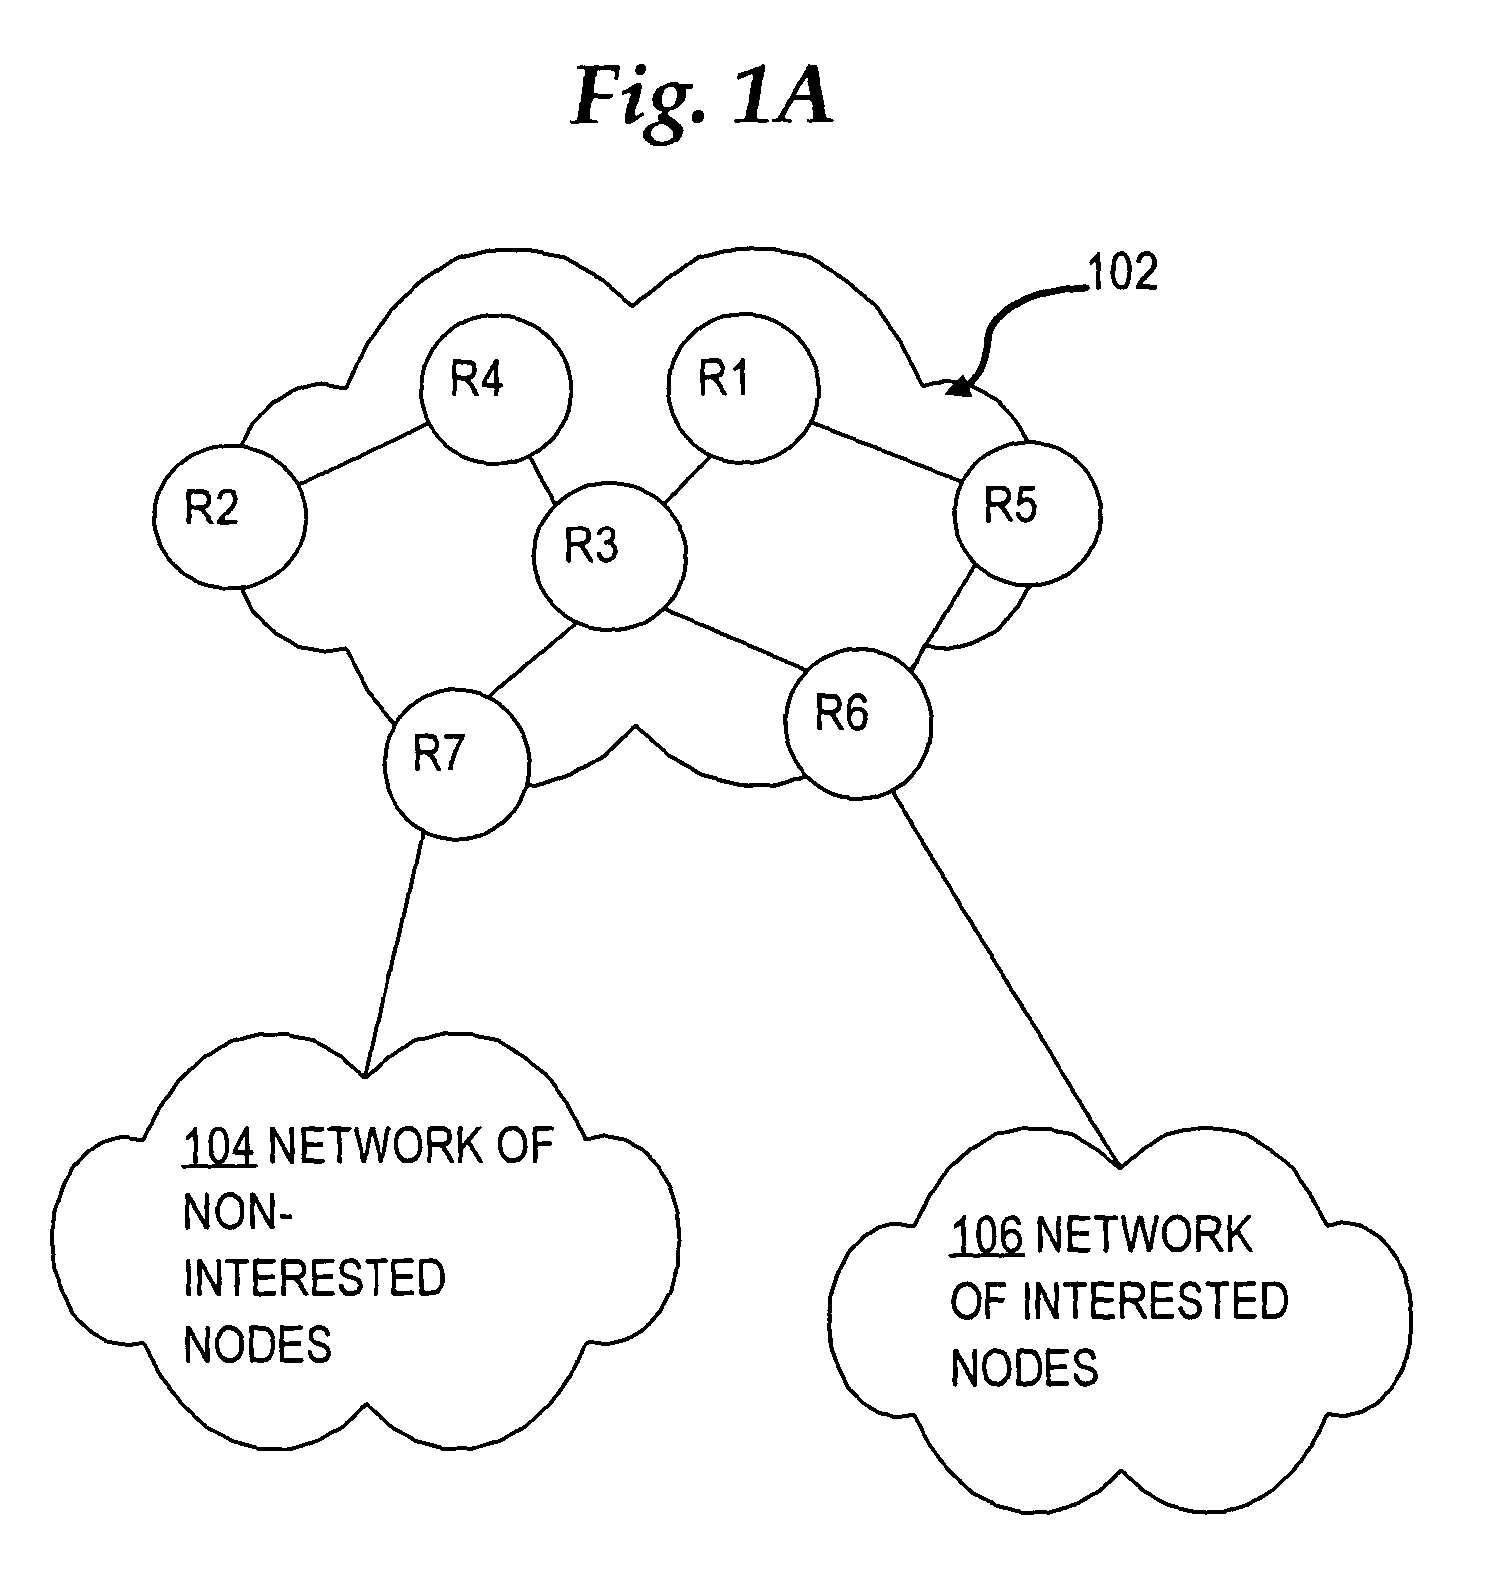 Selectively sending link state messages in a network link state protocol based on interest of network nodes